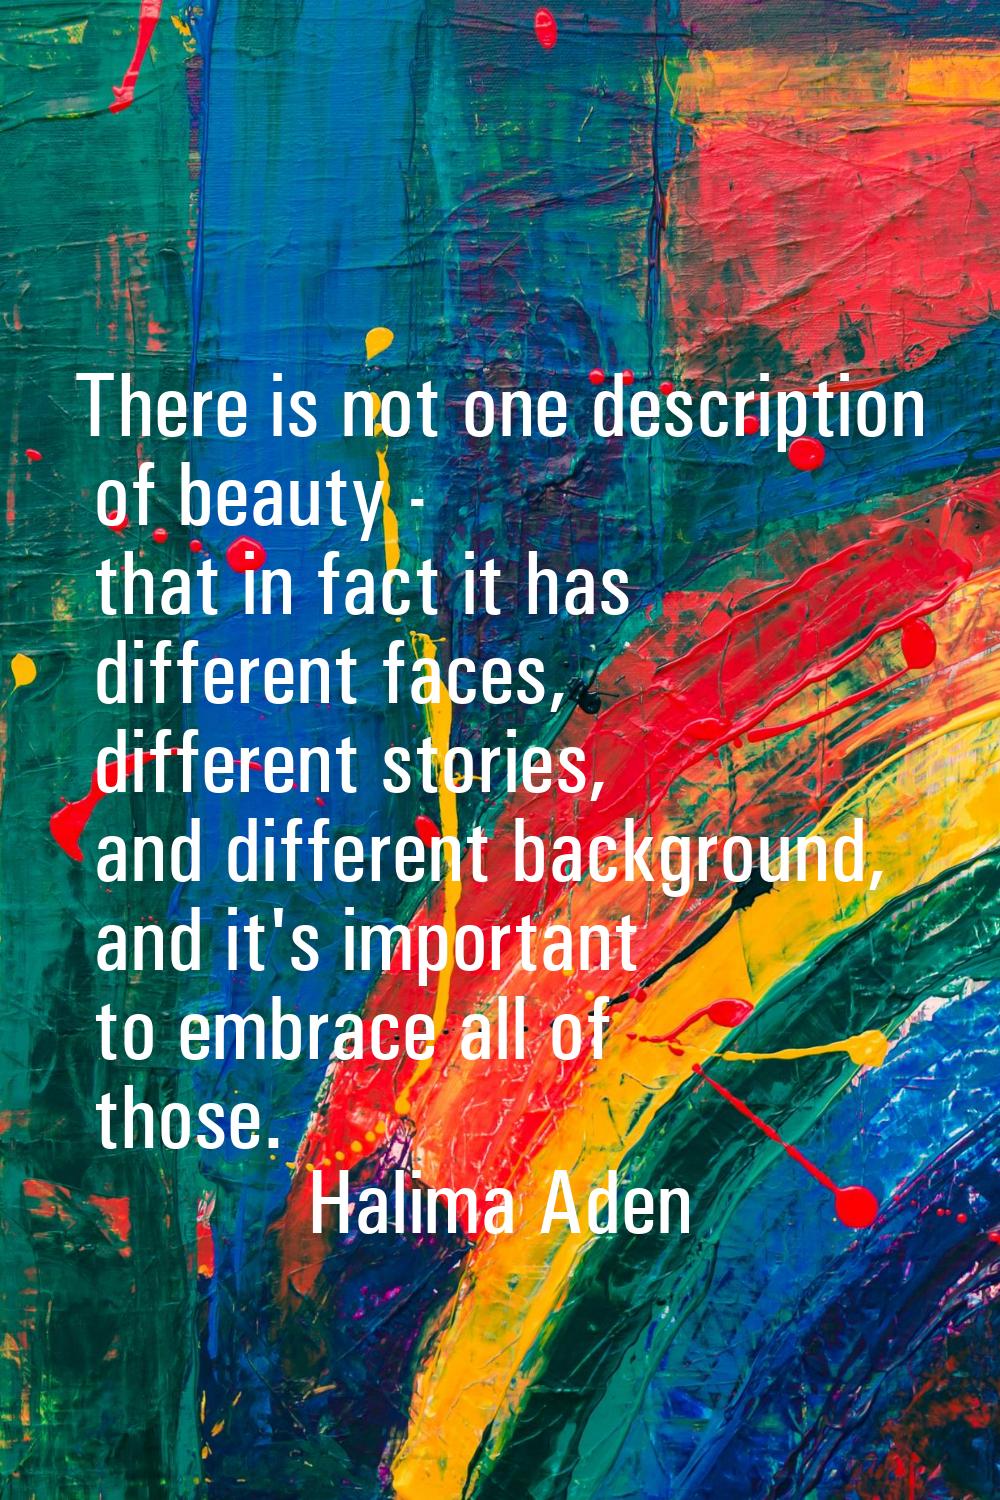 There is not one description of beauty - that in fact it has different faces, different stories, an